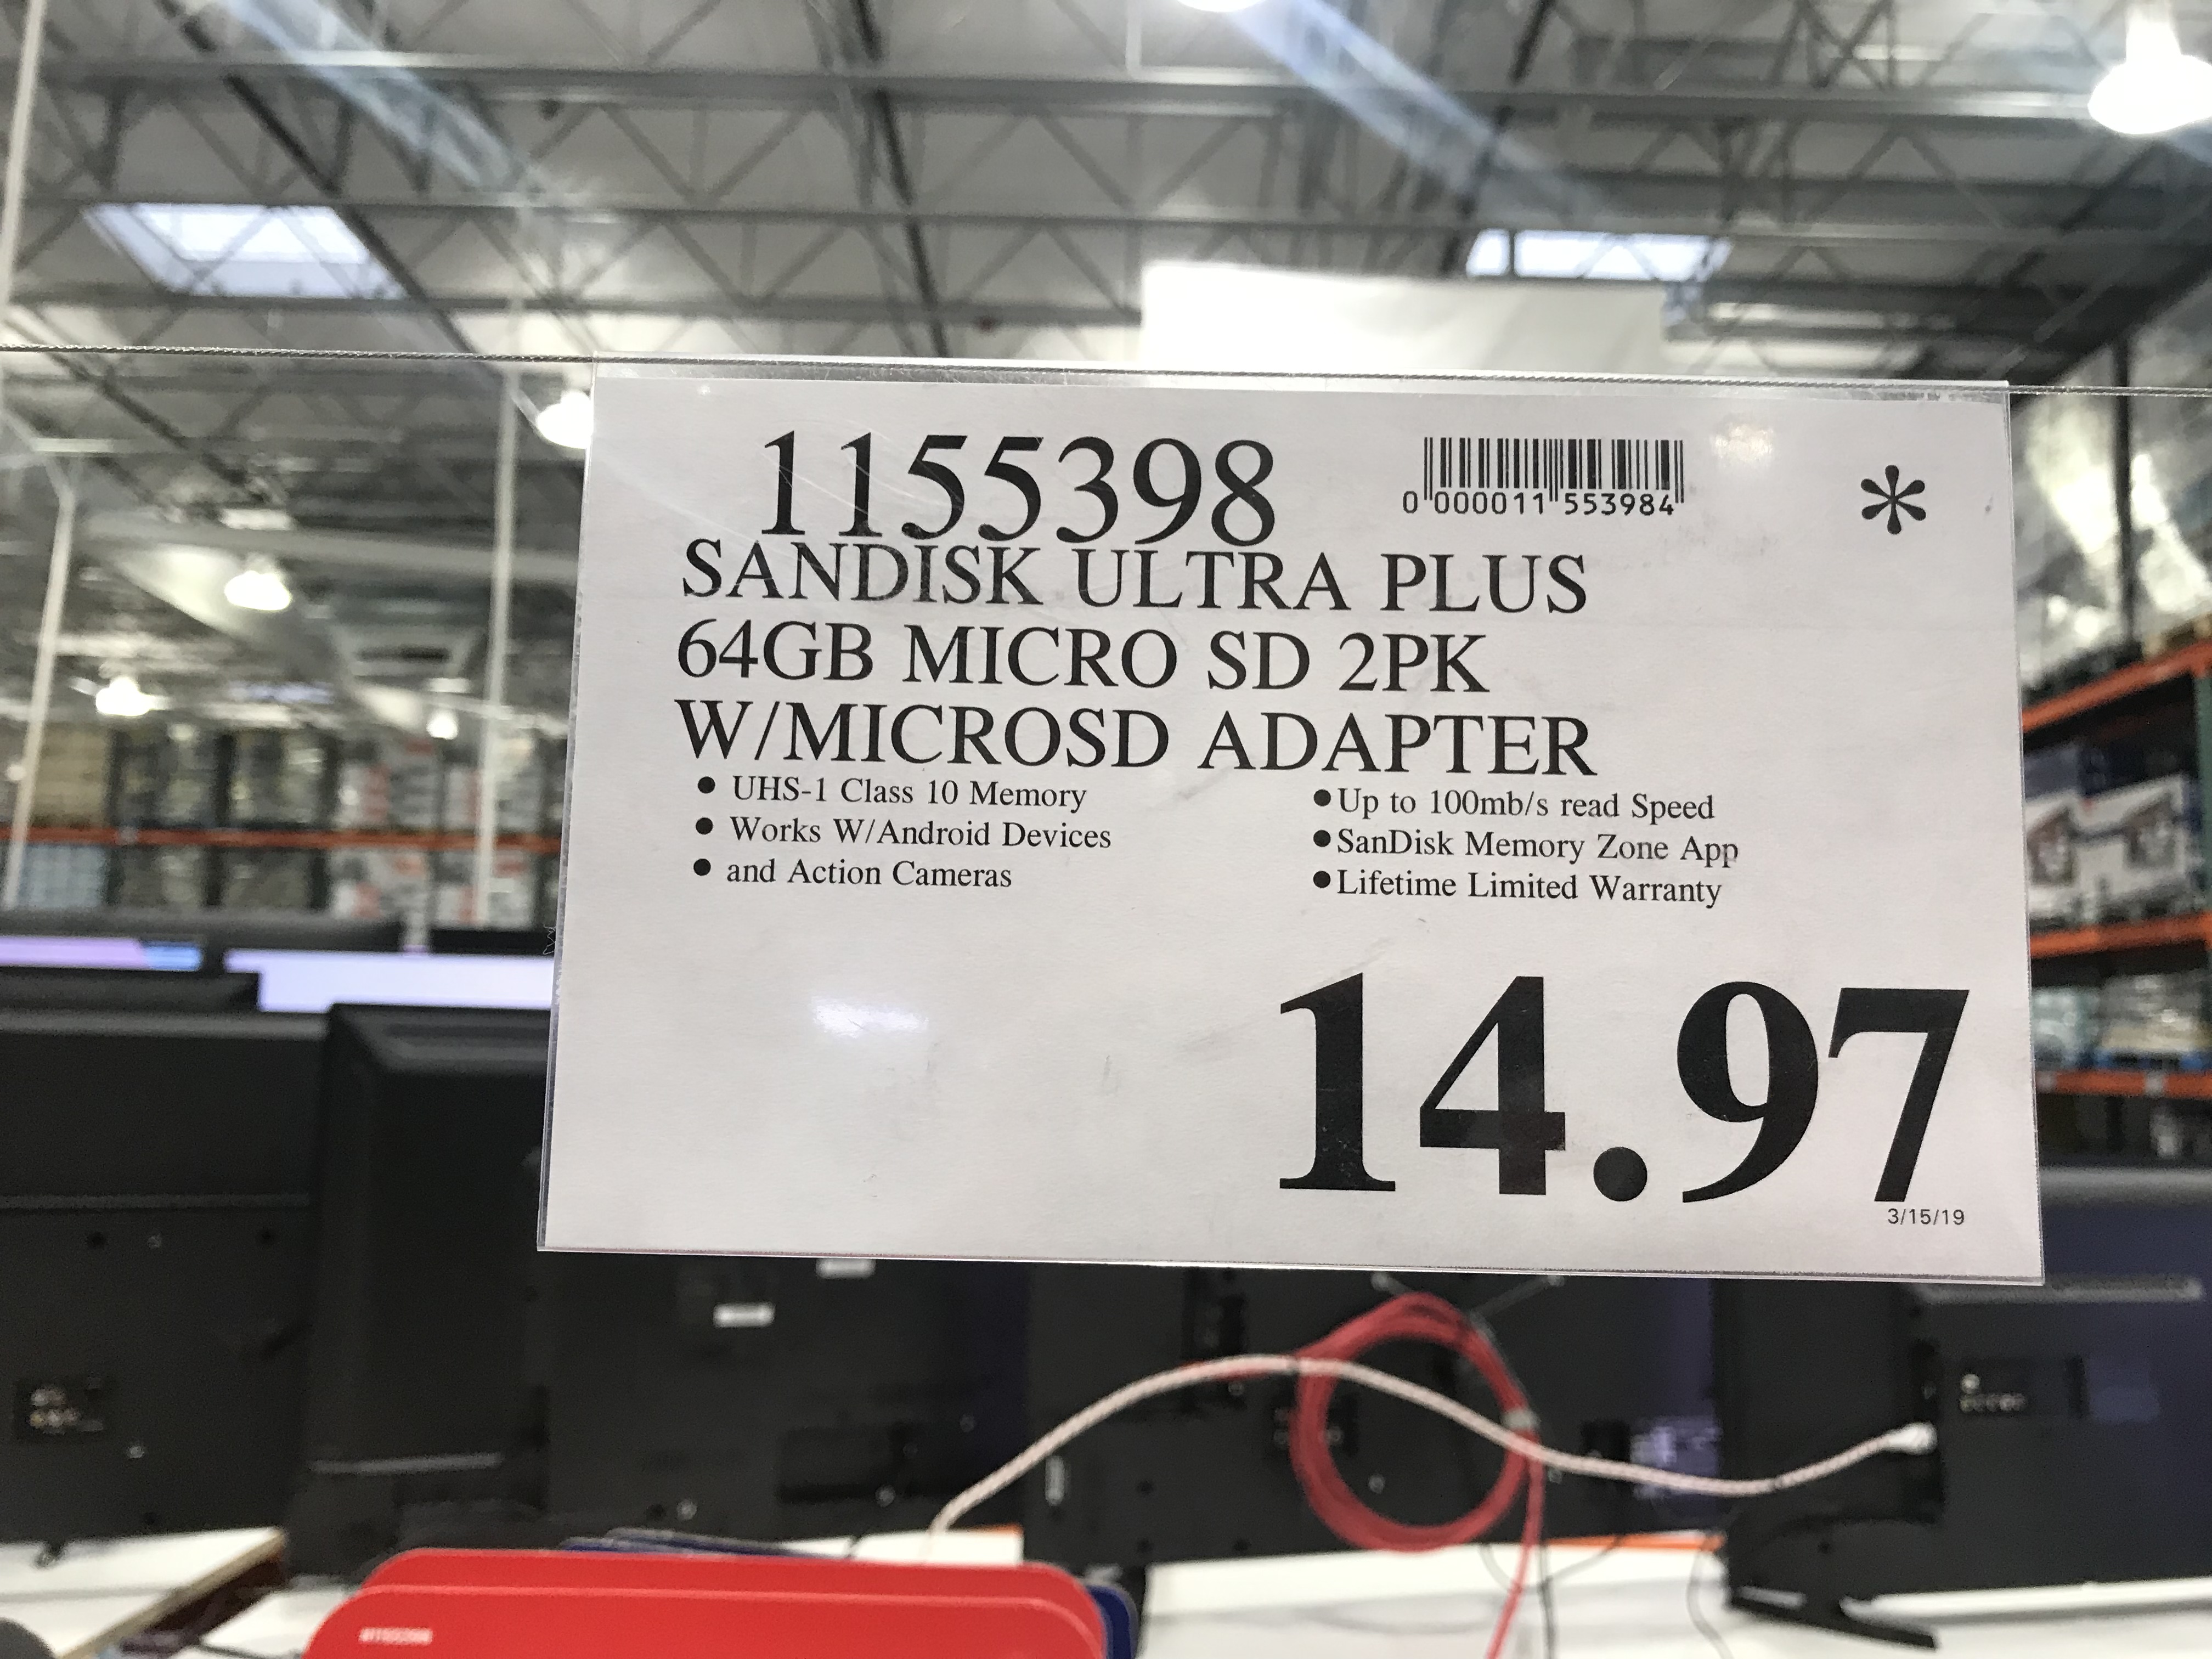 Costco SanDisk Ultra Plus 64 GB microSD with Adapters 2-pack Item 1155398 $14.97 YMMY In-store